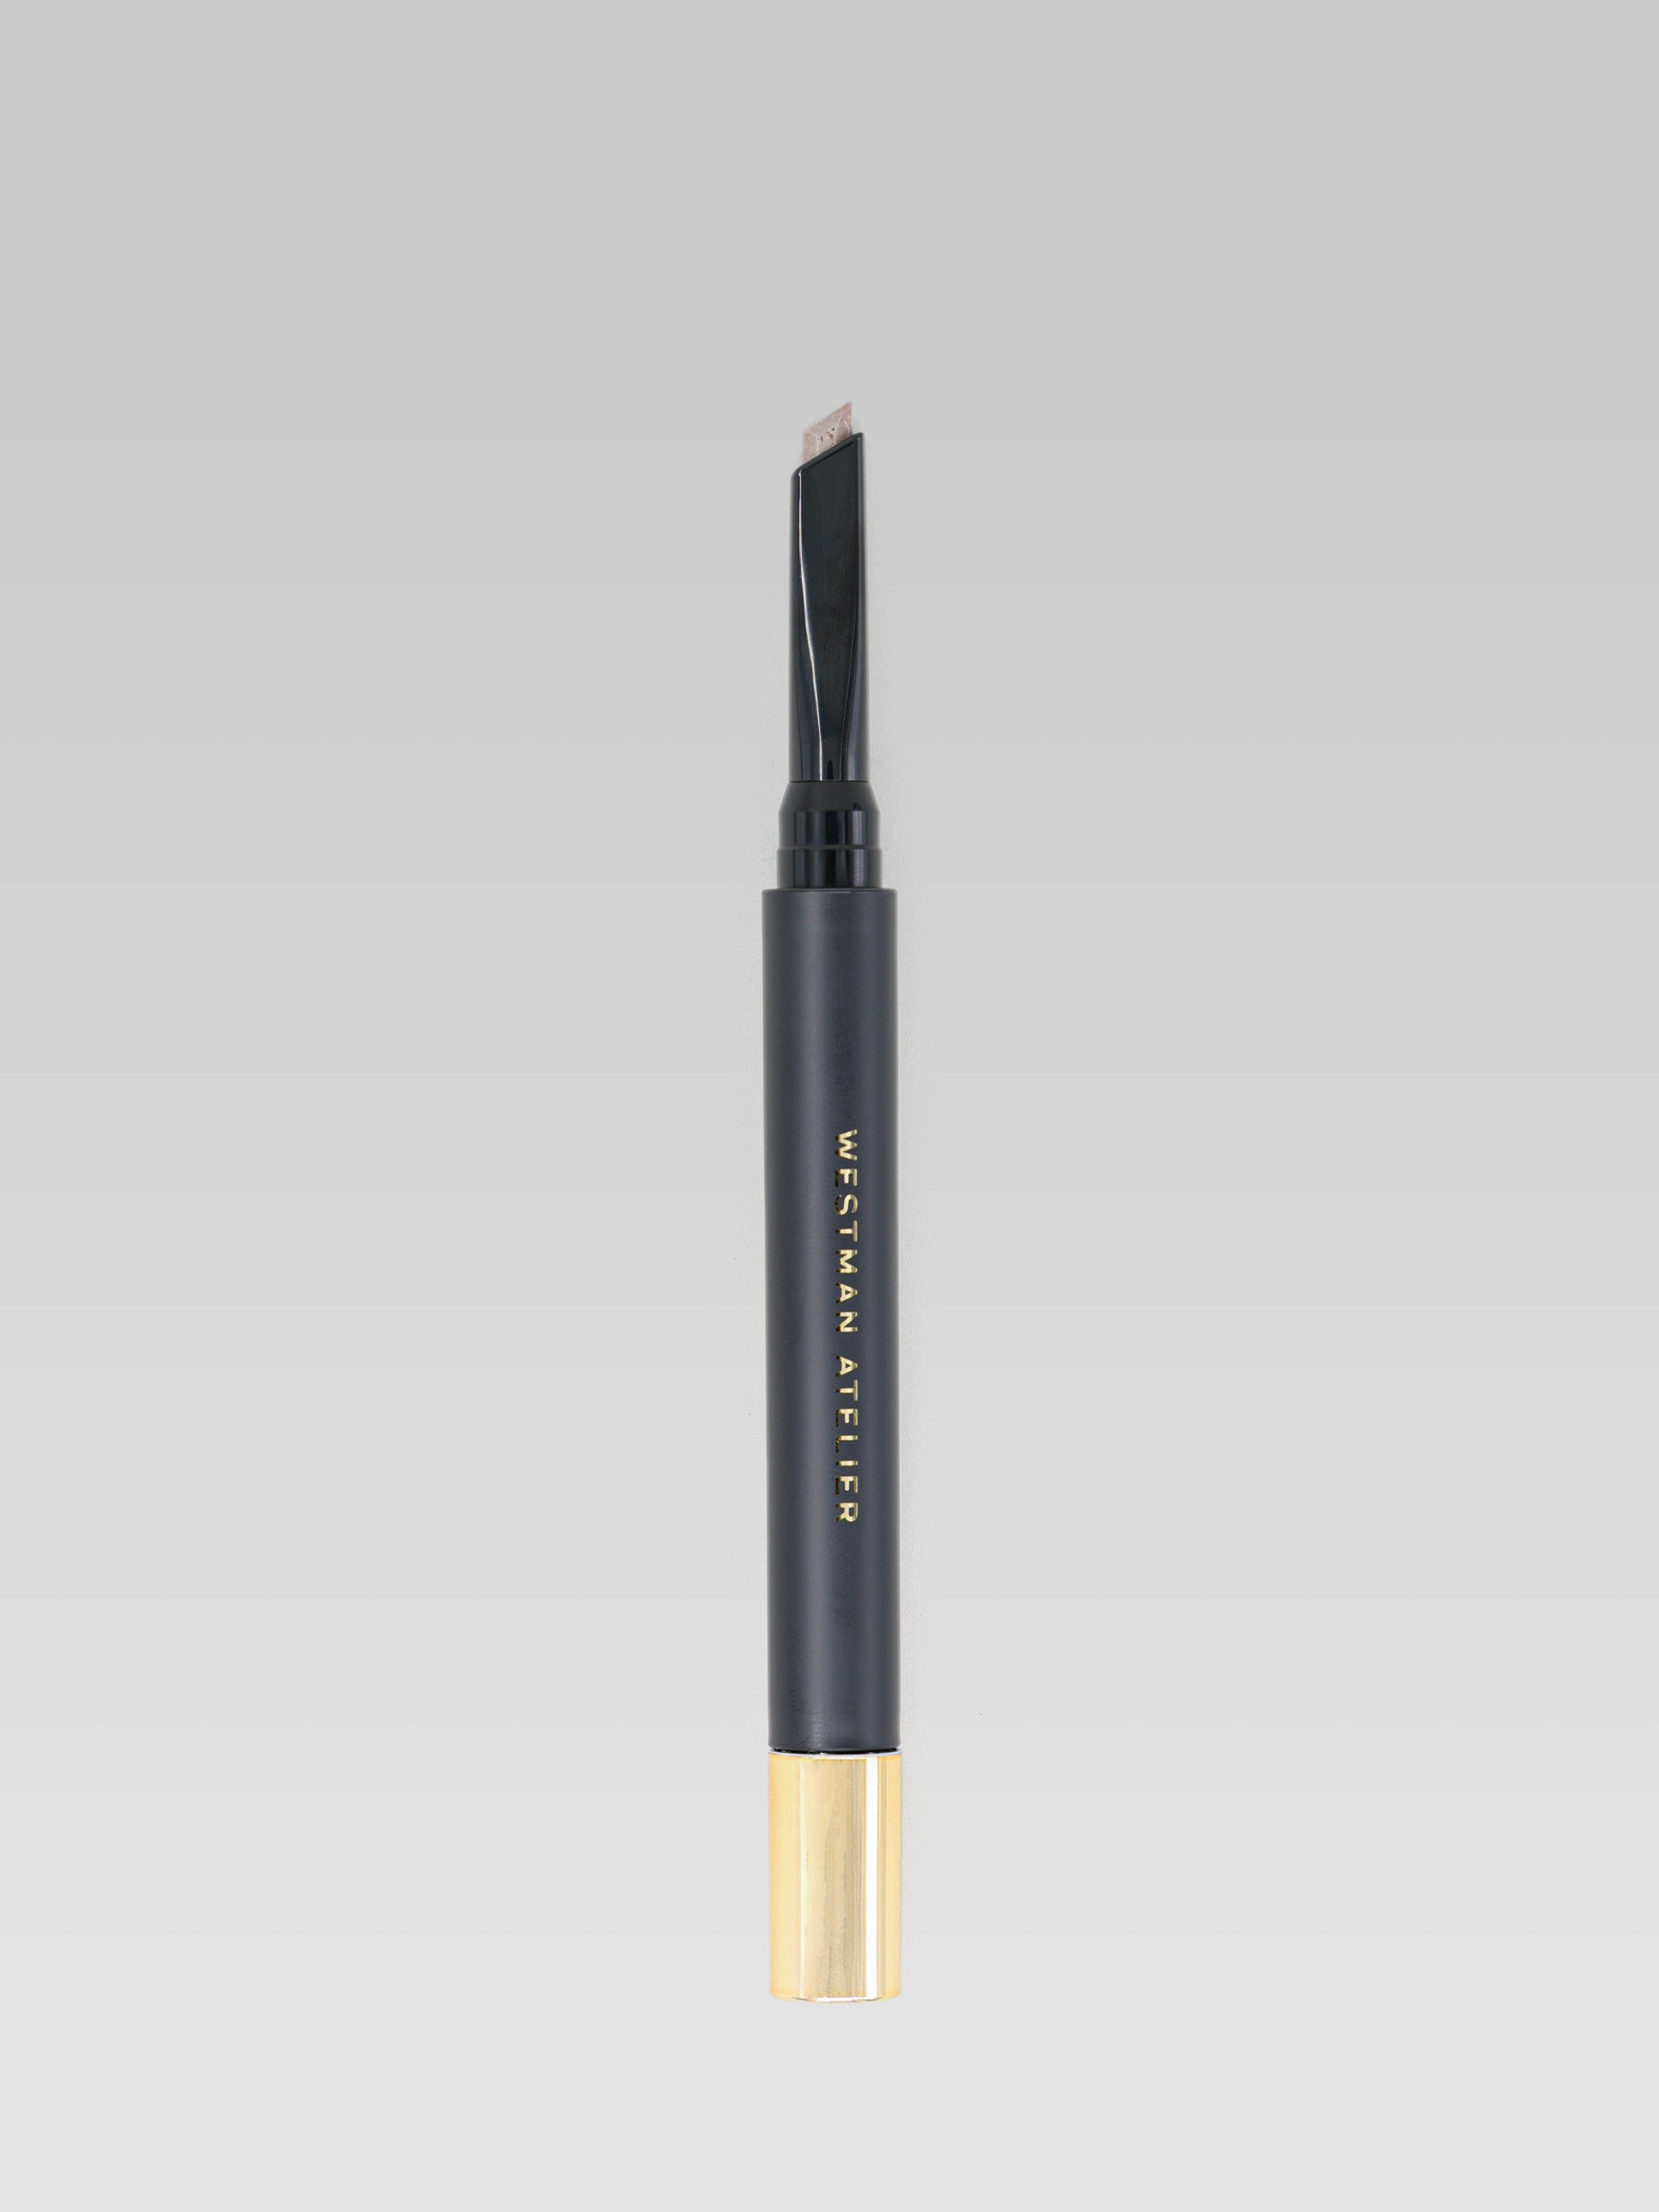 Westman Atelier Bonne Brow Defining Pencil in Stone product shot